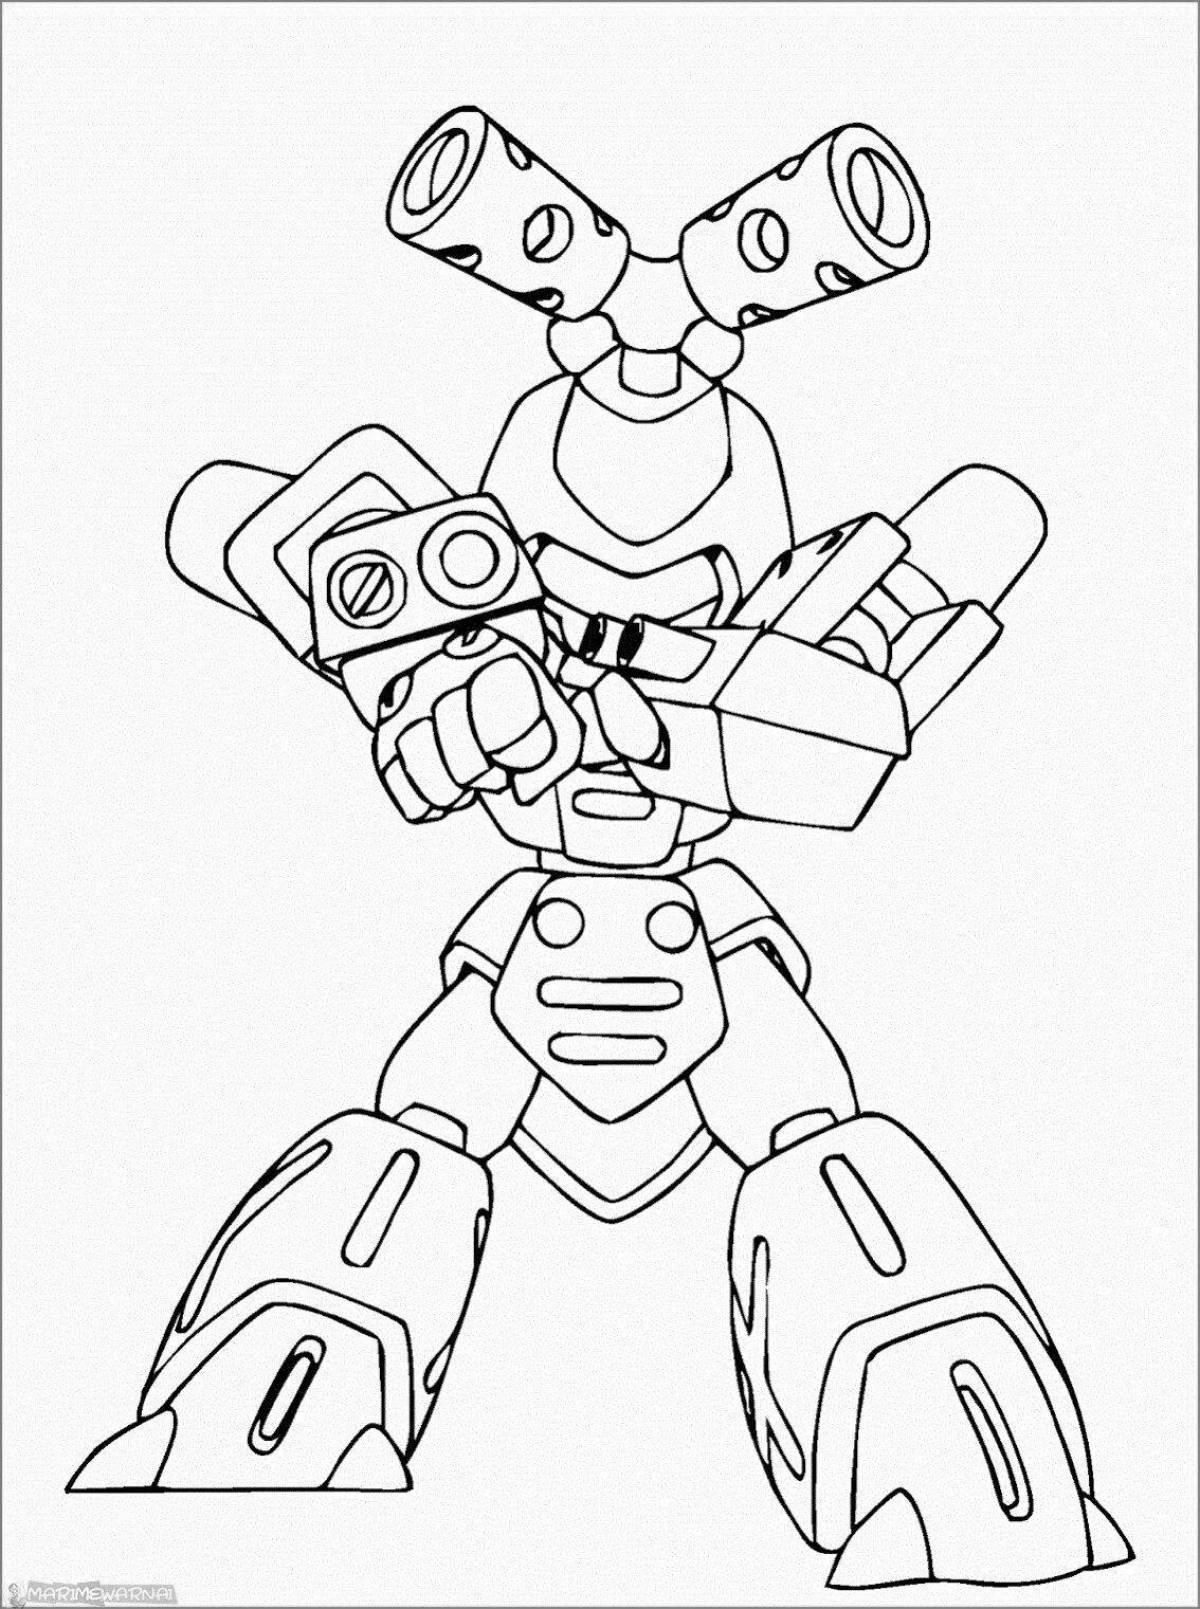 Animated coloring page tobot deltatron